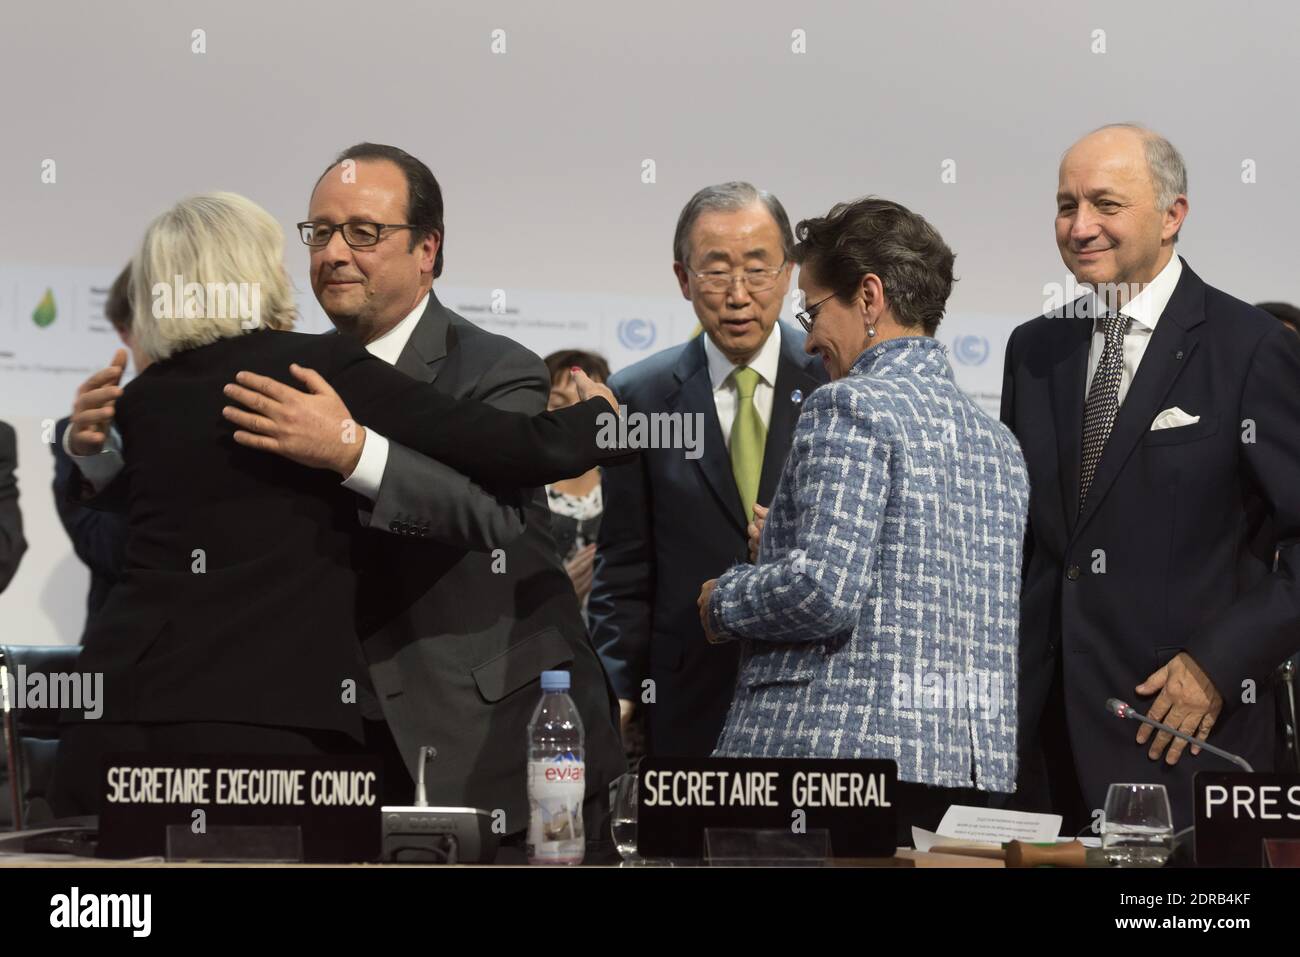 (L-R) French Ambassador for the international Climate Negotiations Responsible for COP21 Laurence Tubiana, French President Francois Hollande, UN Secretary-General Ban Ki-moon, Executive Secretary of the United Nations Framework Convention on Climate Change (UNFCCC) Christiana Figueres and French Foreign Affairs Minister and President-designate of COP21 Laurent Fabius during the adoption of a historic global warming pact as part of the COP21 Climate Change Conference at Le Bourget, near Paris, France on December 13, 2015. Photo by Jacques Witt/Pool/ABACAPRESS.COM Stock Photo